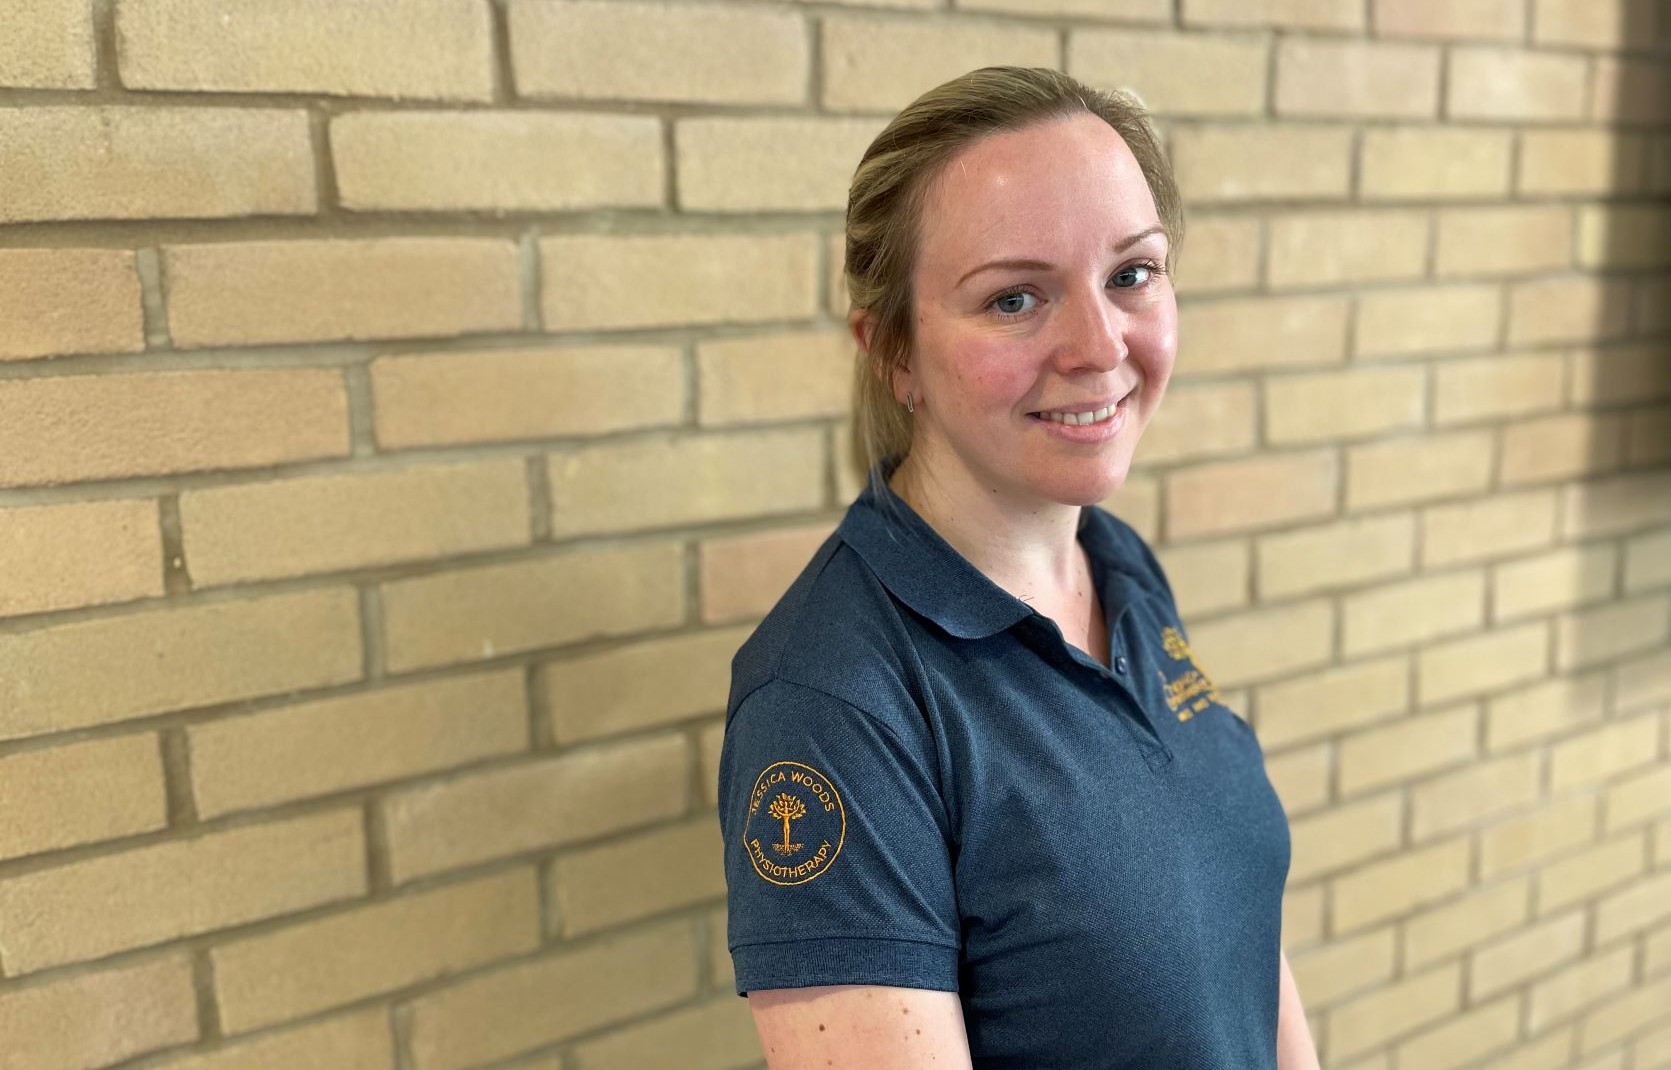 Introducing our head physio Jess Woods…